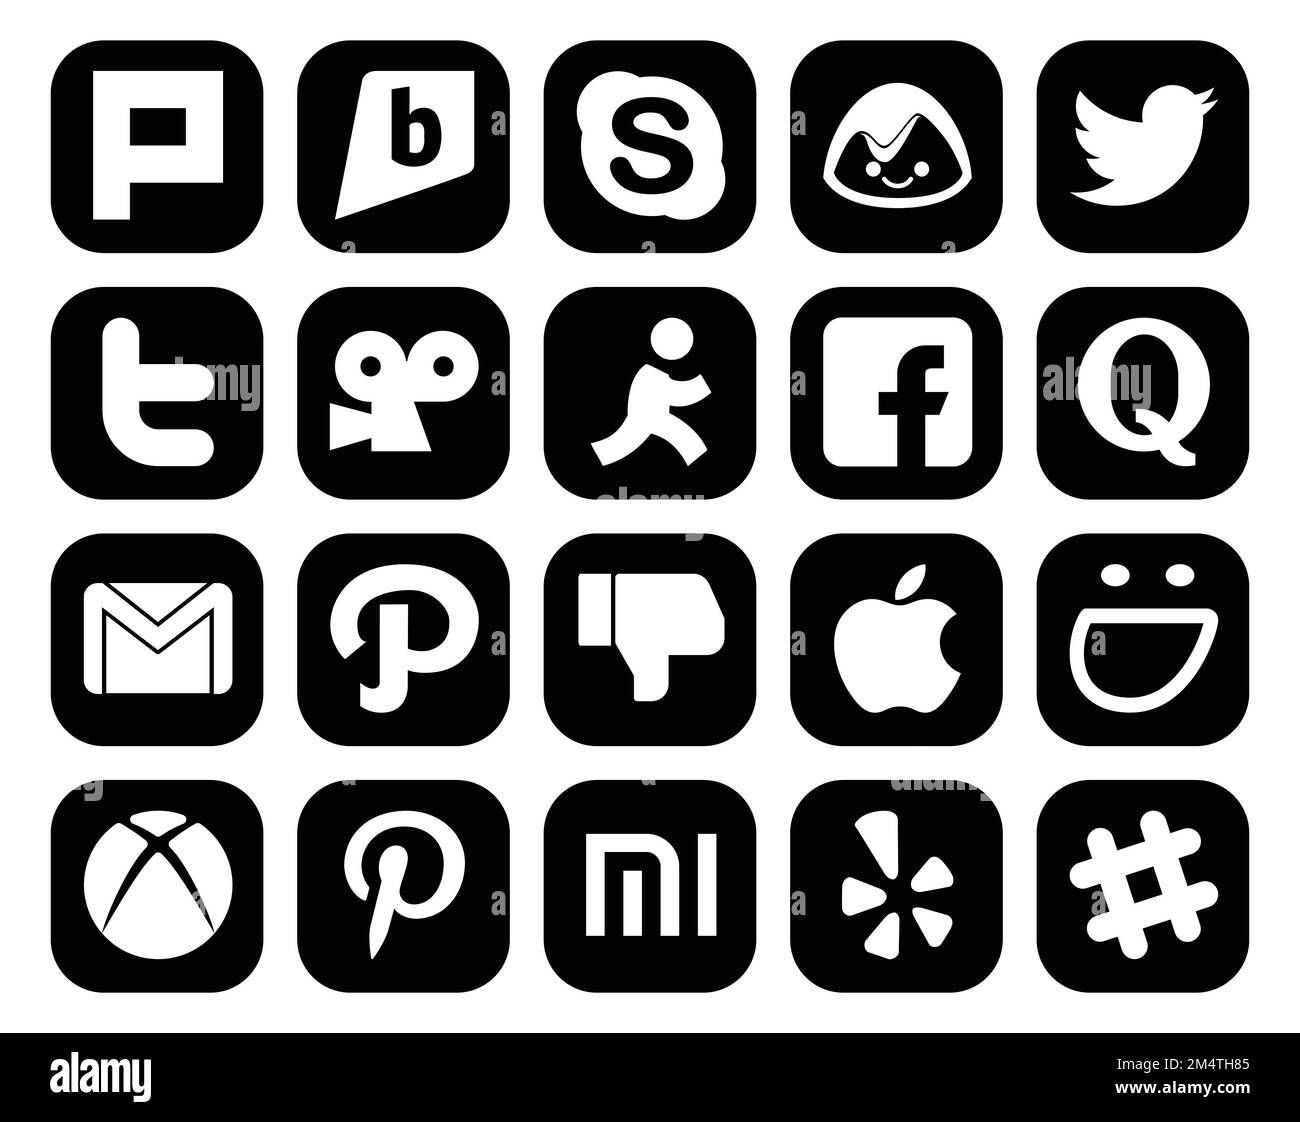 20 Social Media Icon Pack Including apple. path. aim. mail. gmail Stock Vector